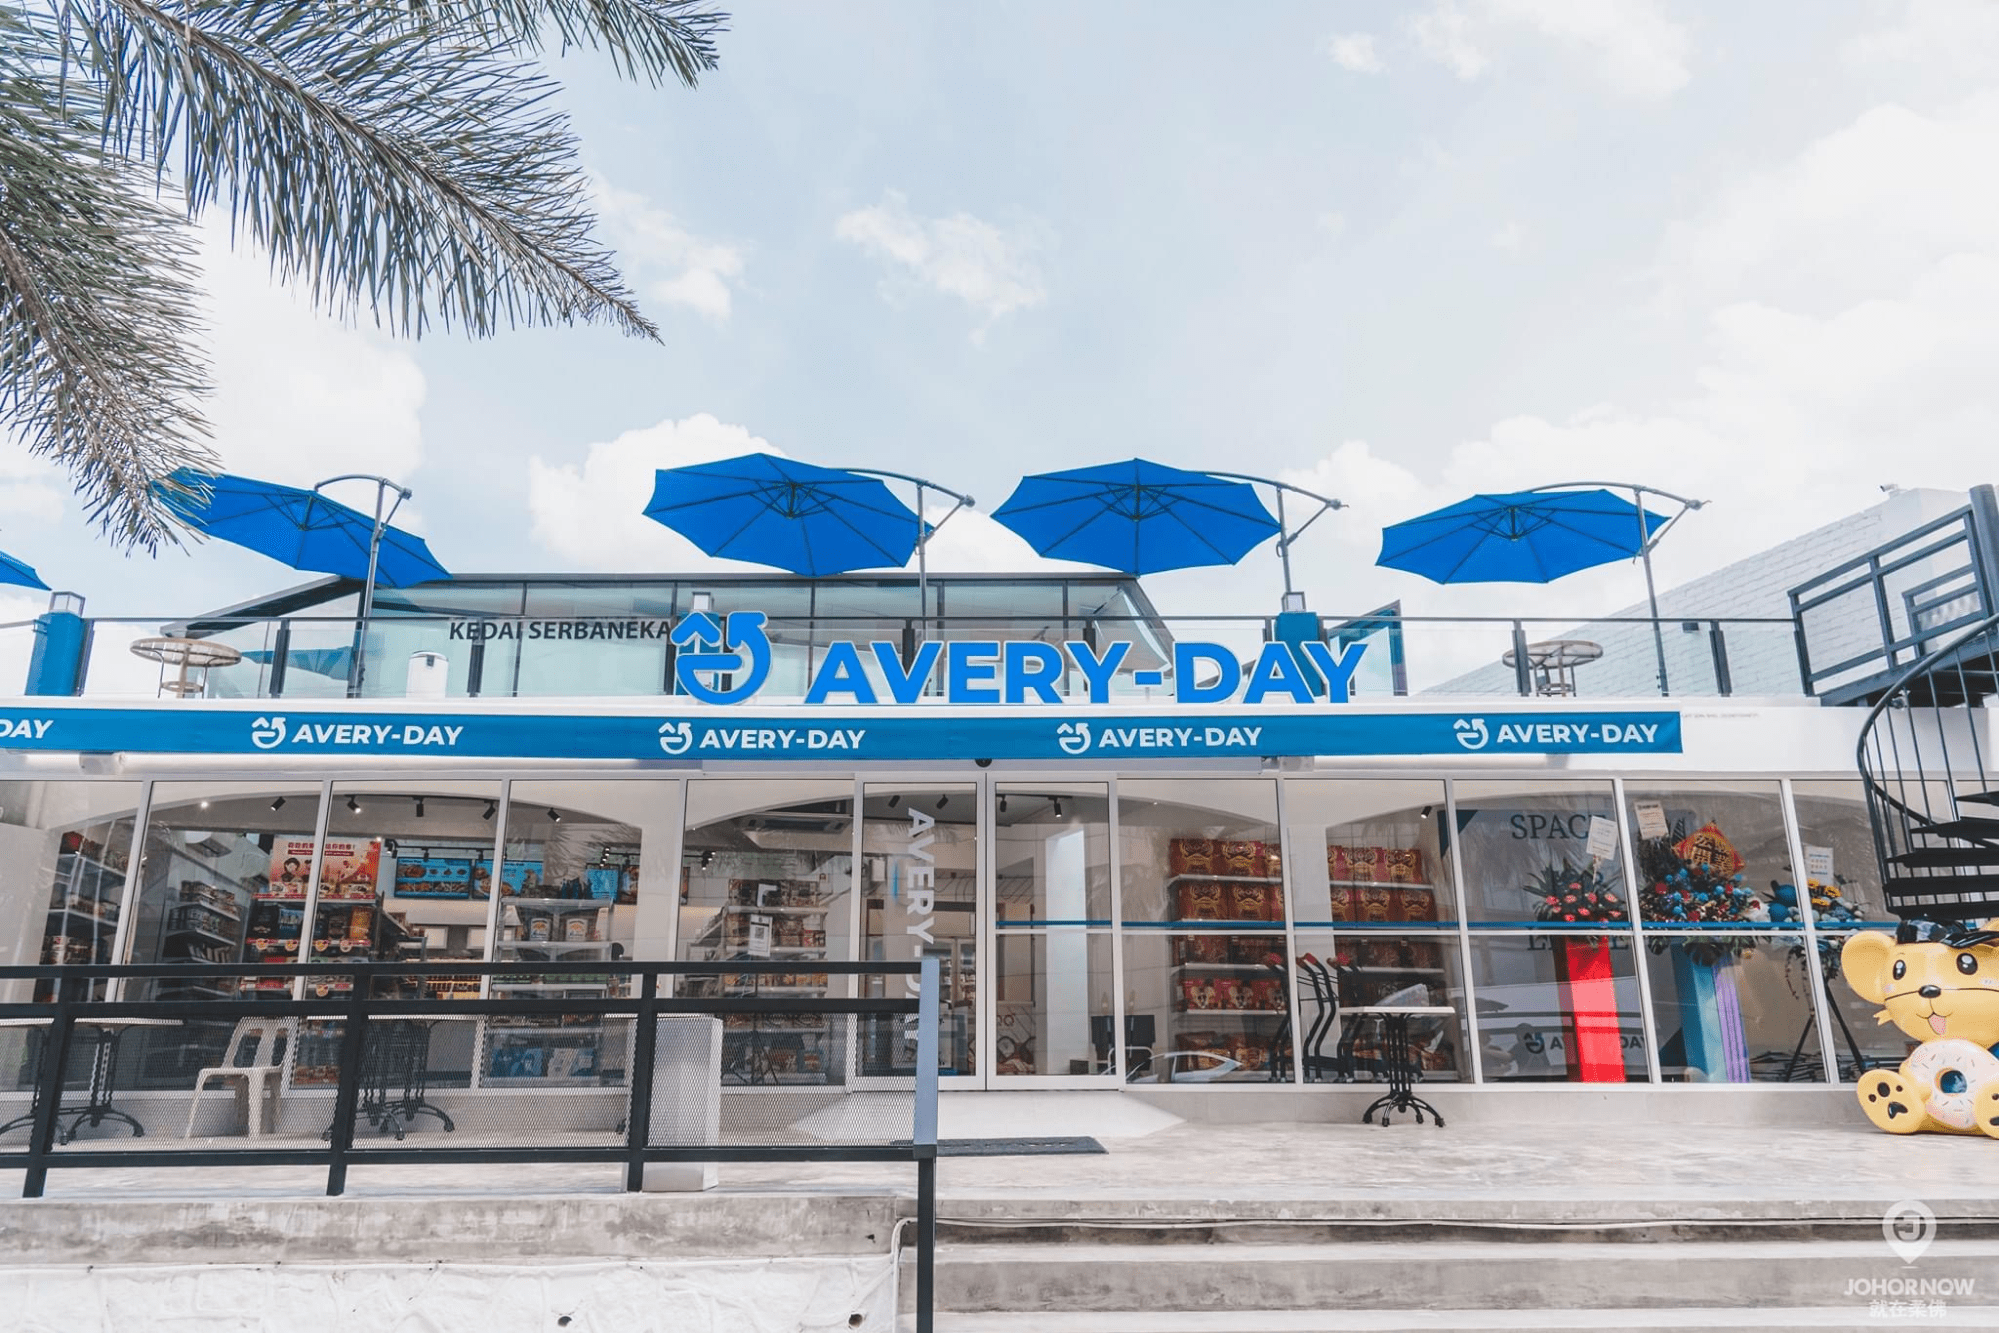 KSL city mall guide avery-day convenience store nearby